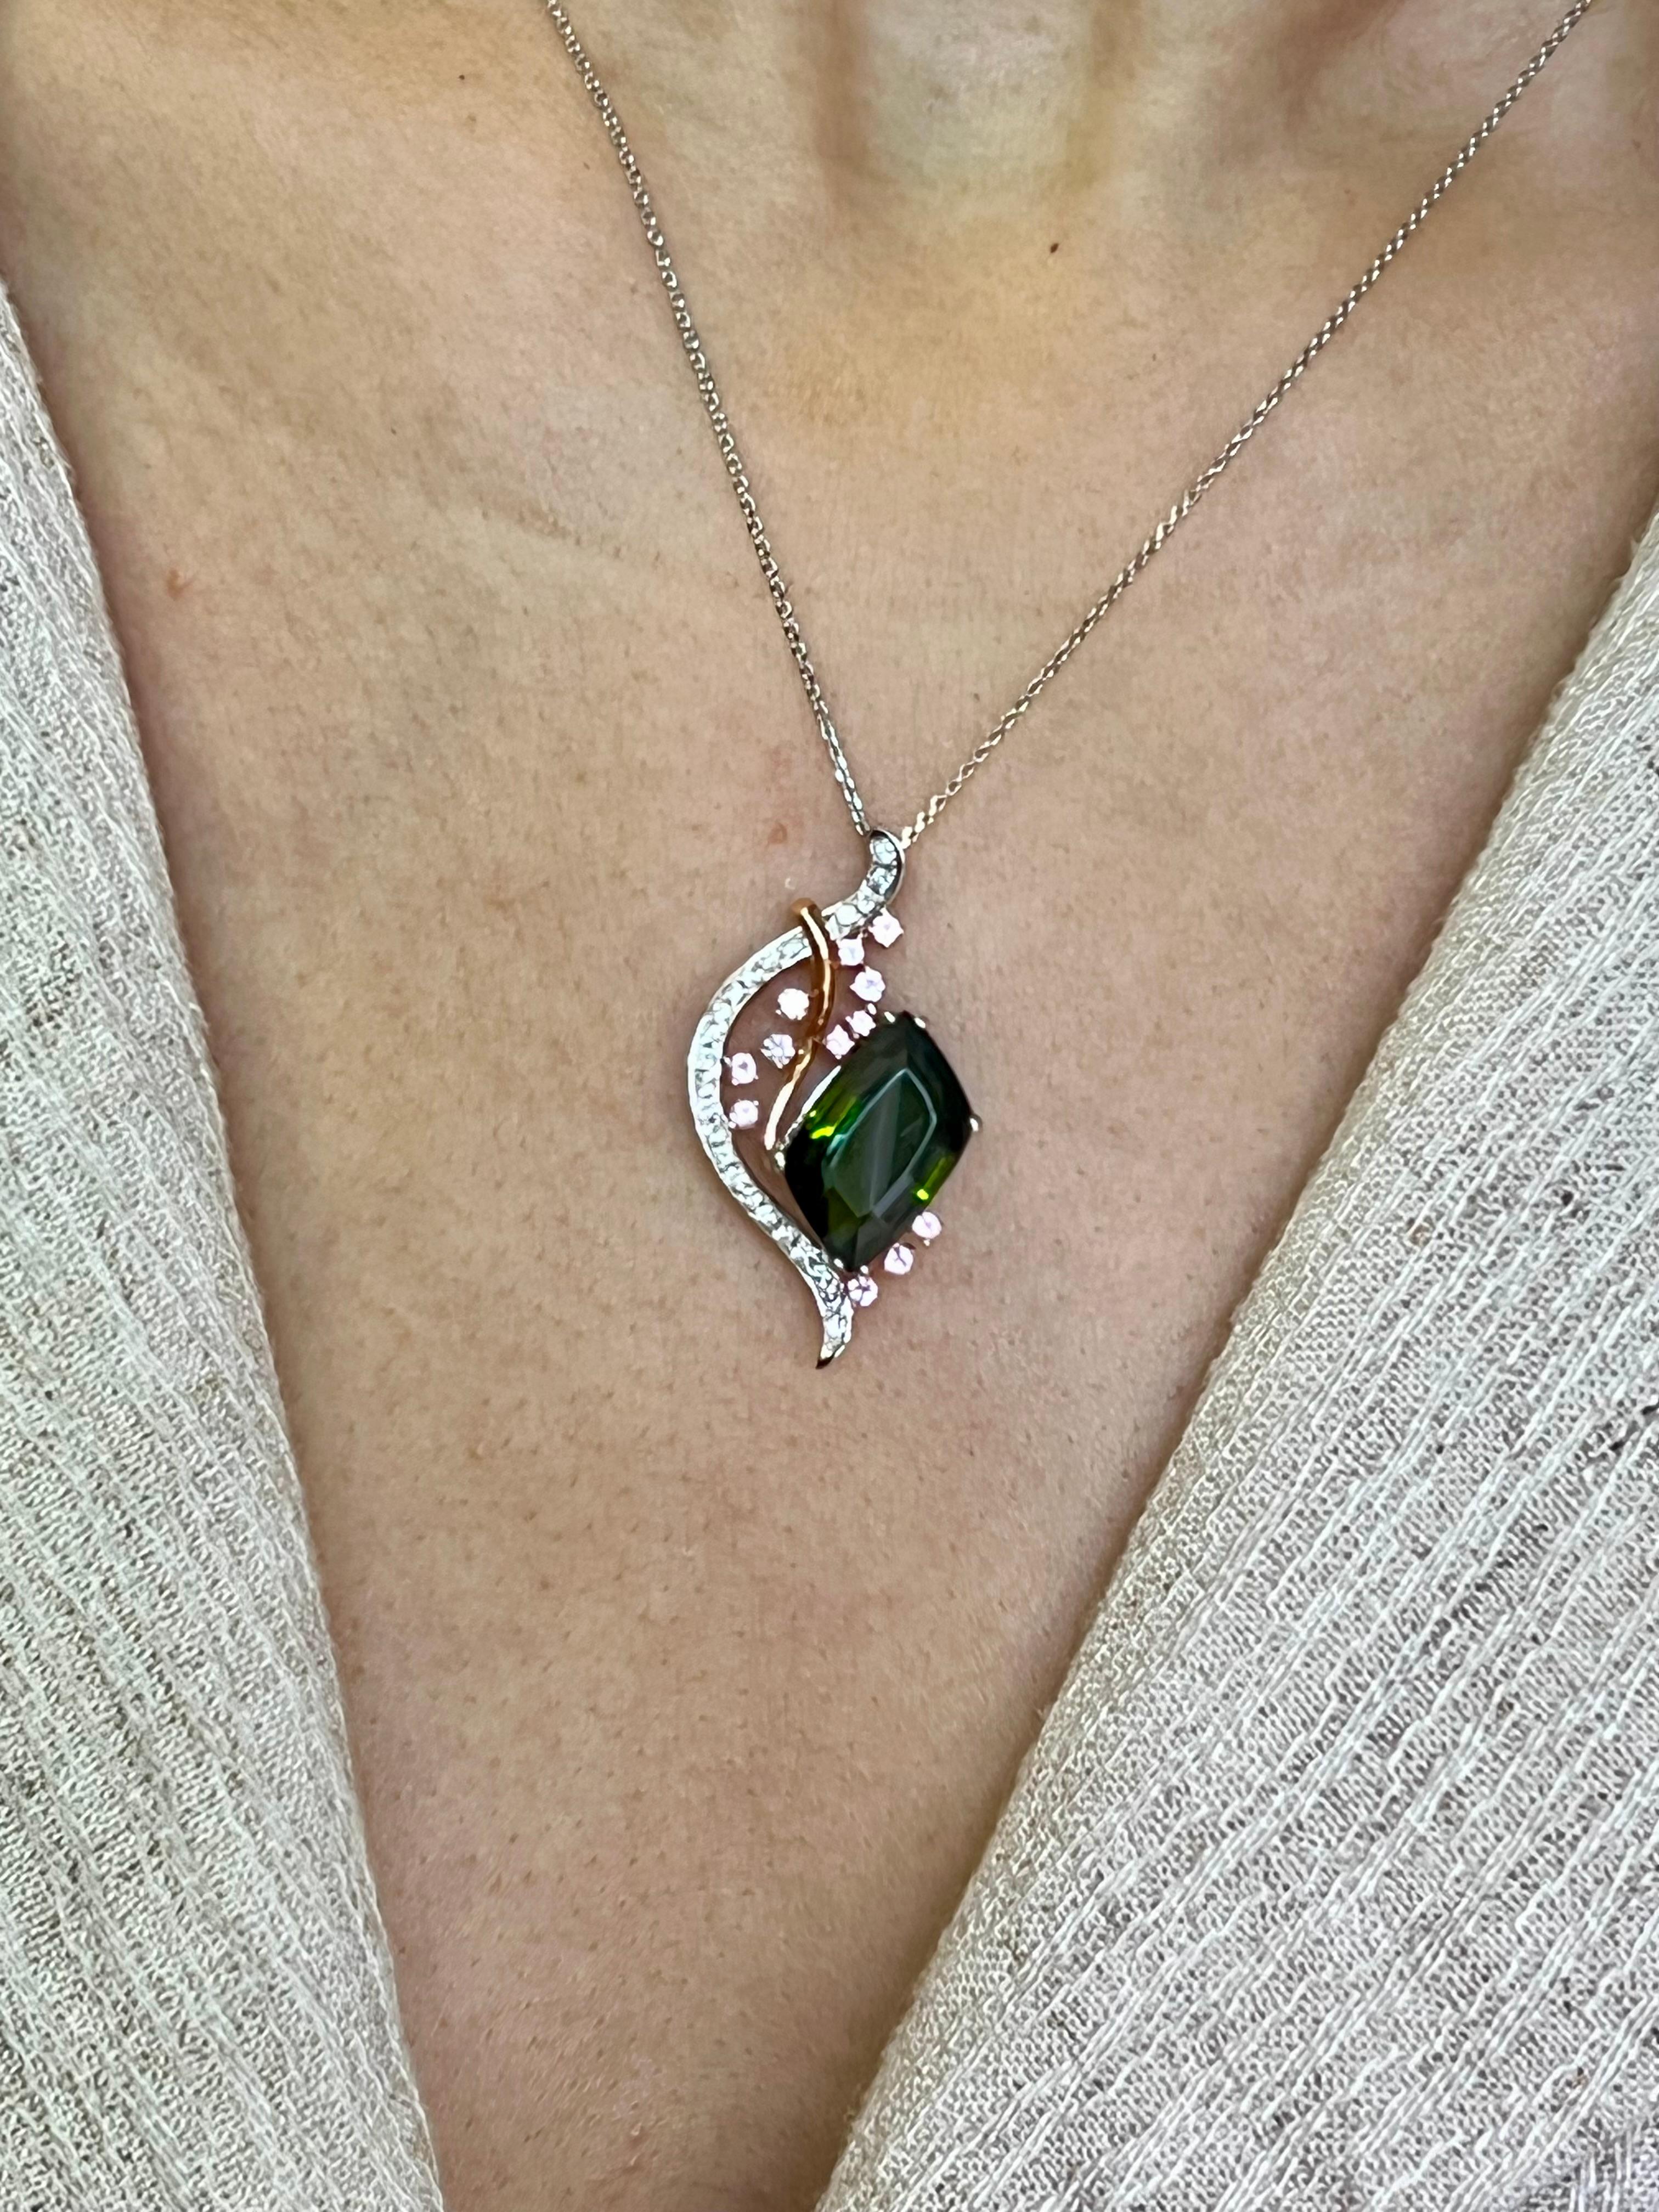 Please check out the HD video. This is a versatile piece of jewelry. You can wear this pendant dressed up or down. The green tourmaline pendant is made of 18k white and rose gold, pink sapphires and diamonds. There is one larger green tourmaline